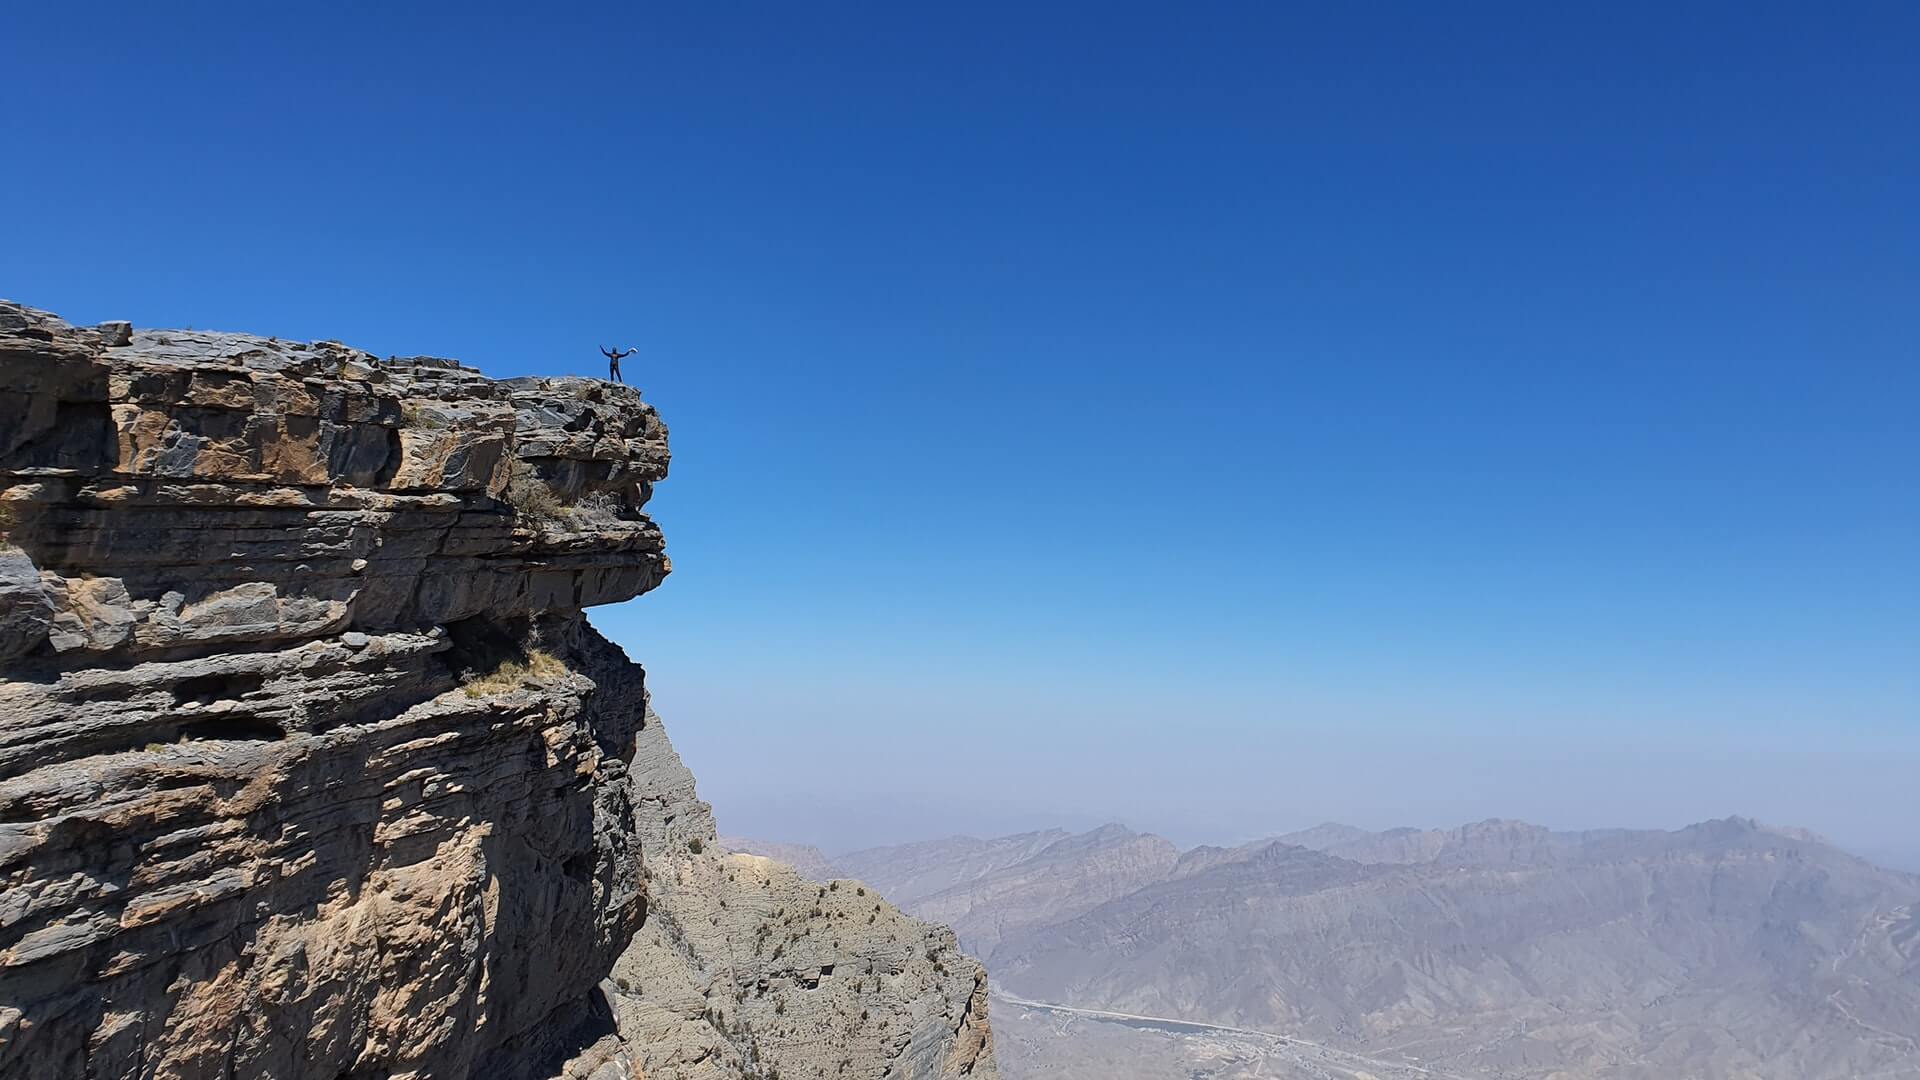 An epic lookout in Jebel Shams - a good place to go hiking in Oman